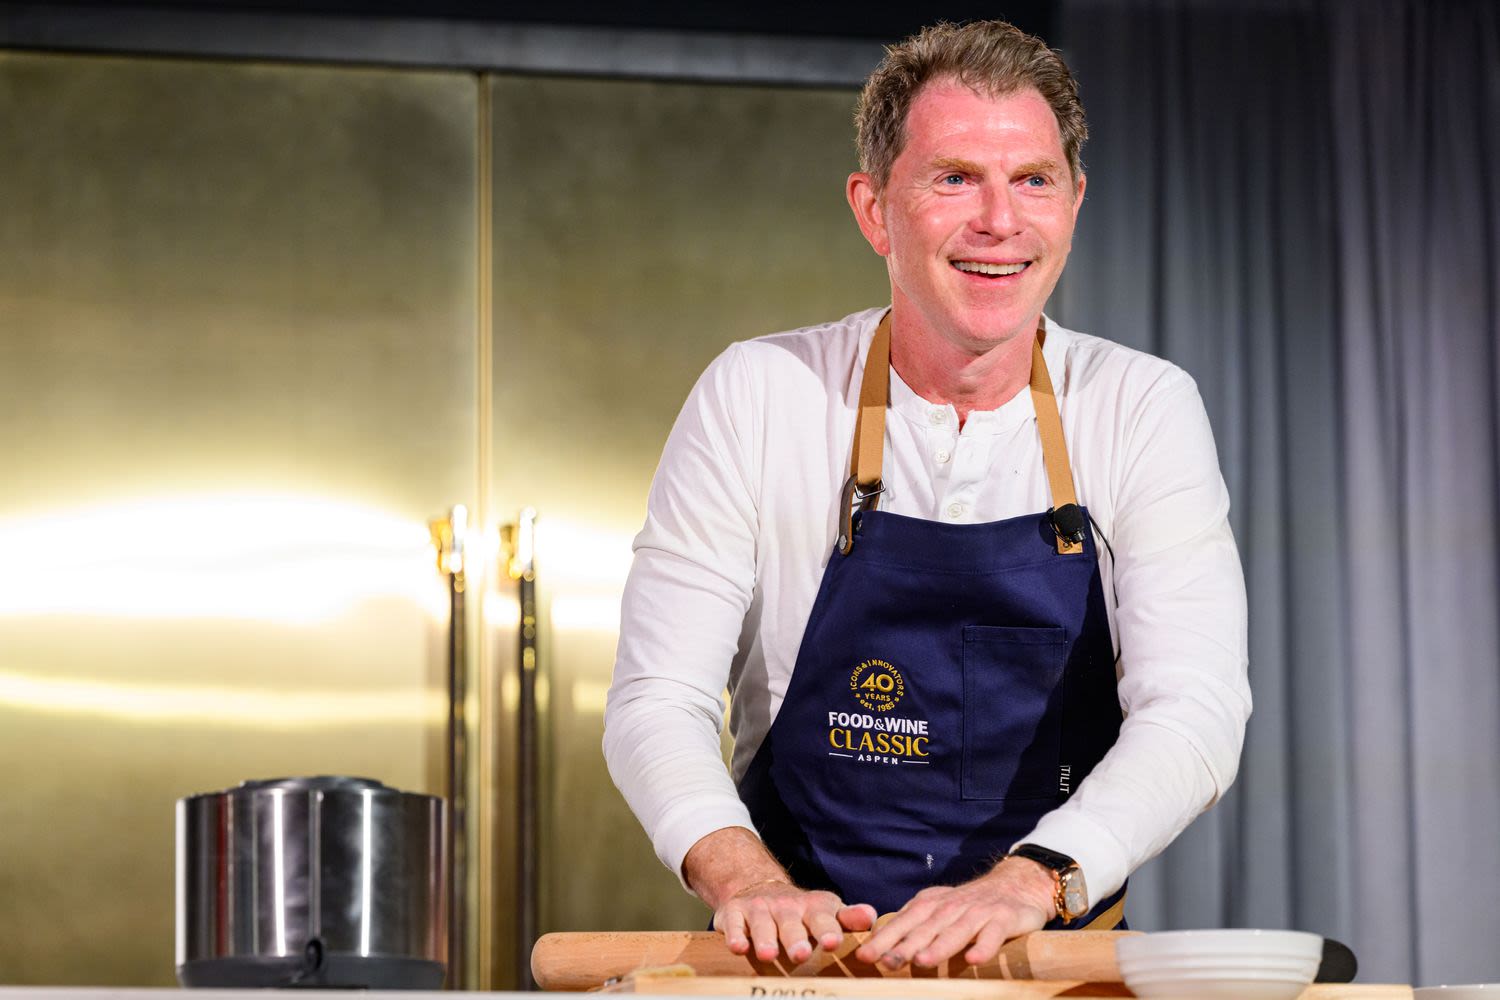 Bobby Flay Says Pilates Reversed the ‘Very Decent Curve’ in His Spine from ‘Standing Hunched Over a Cutting Board’